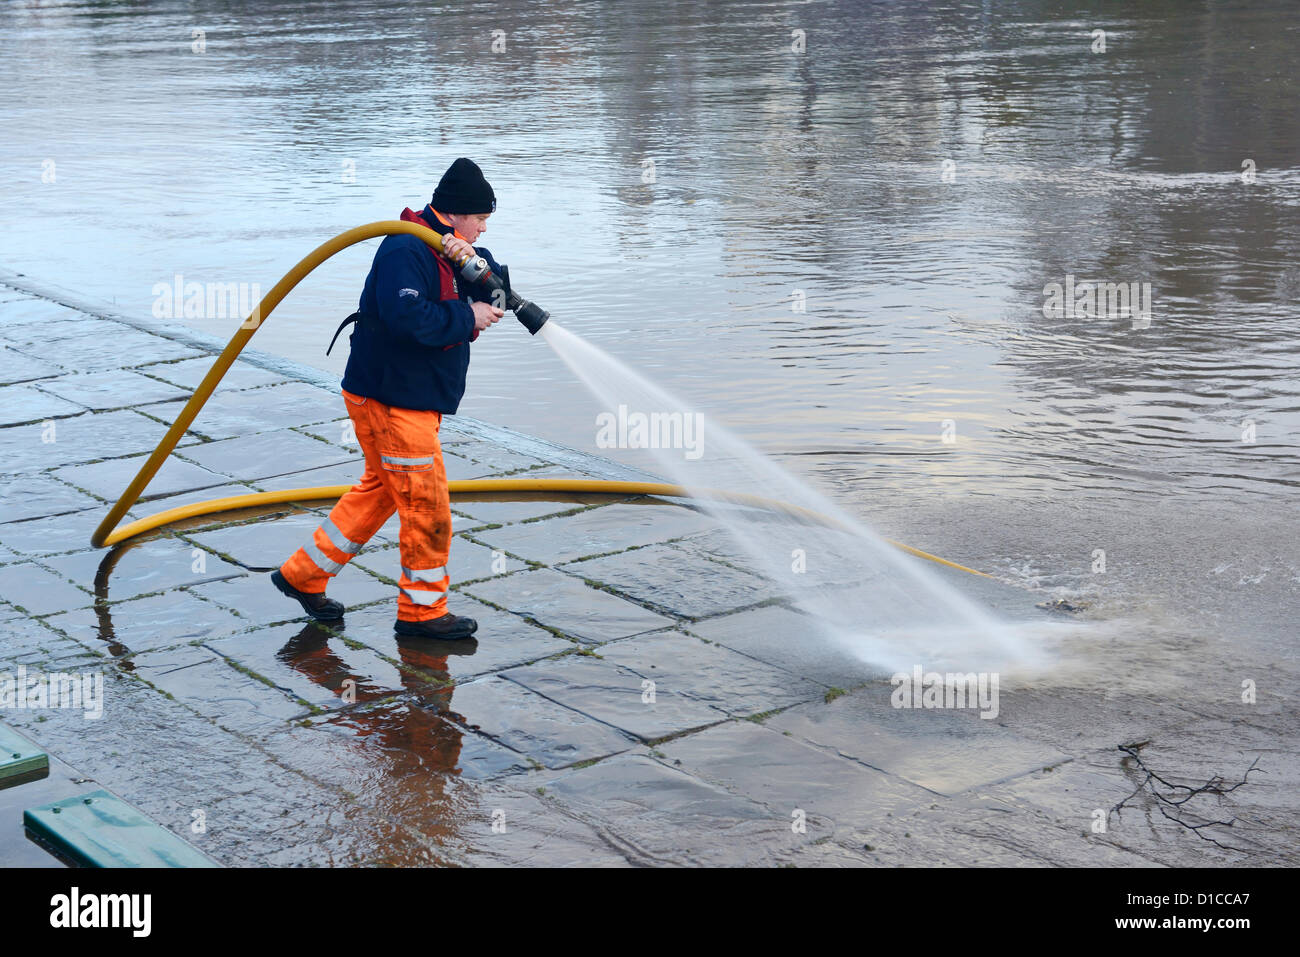 A worker washes mud and silt from the pavement at The Groves in Chester which was caused by the heavy rain the previous day in Wales making the river level through Chester much higher than normal. Stock Photo